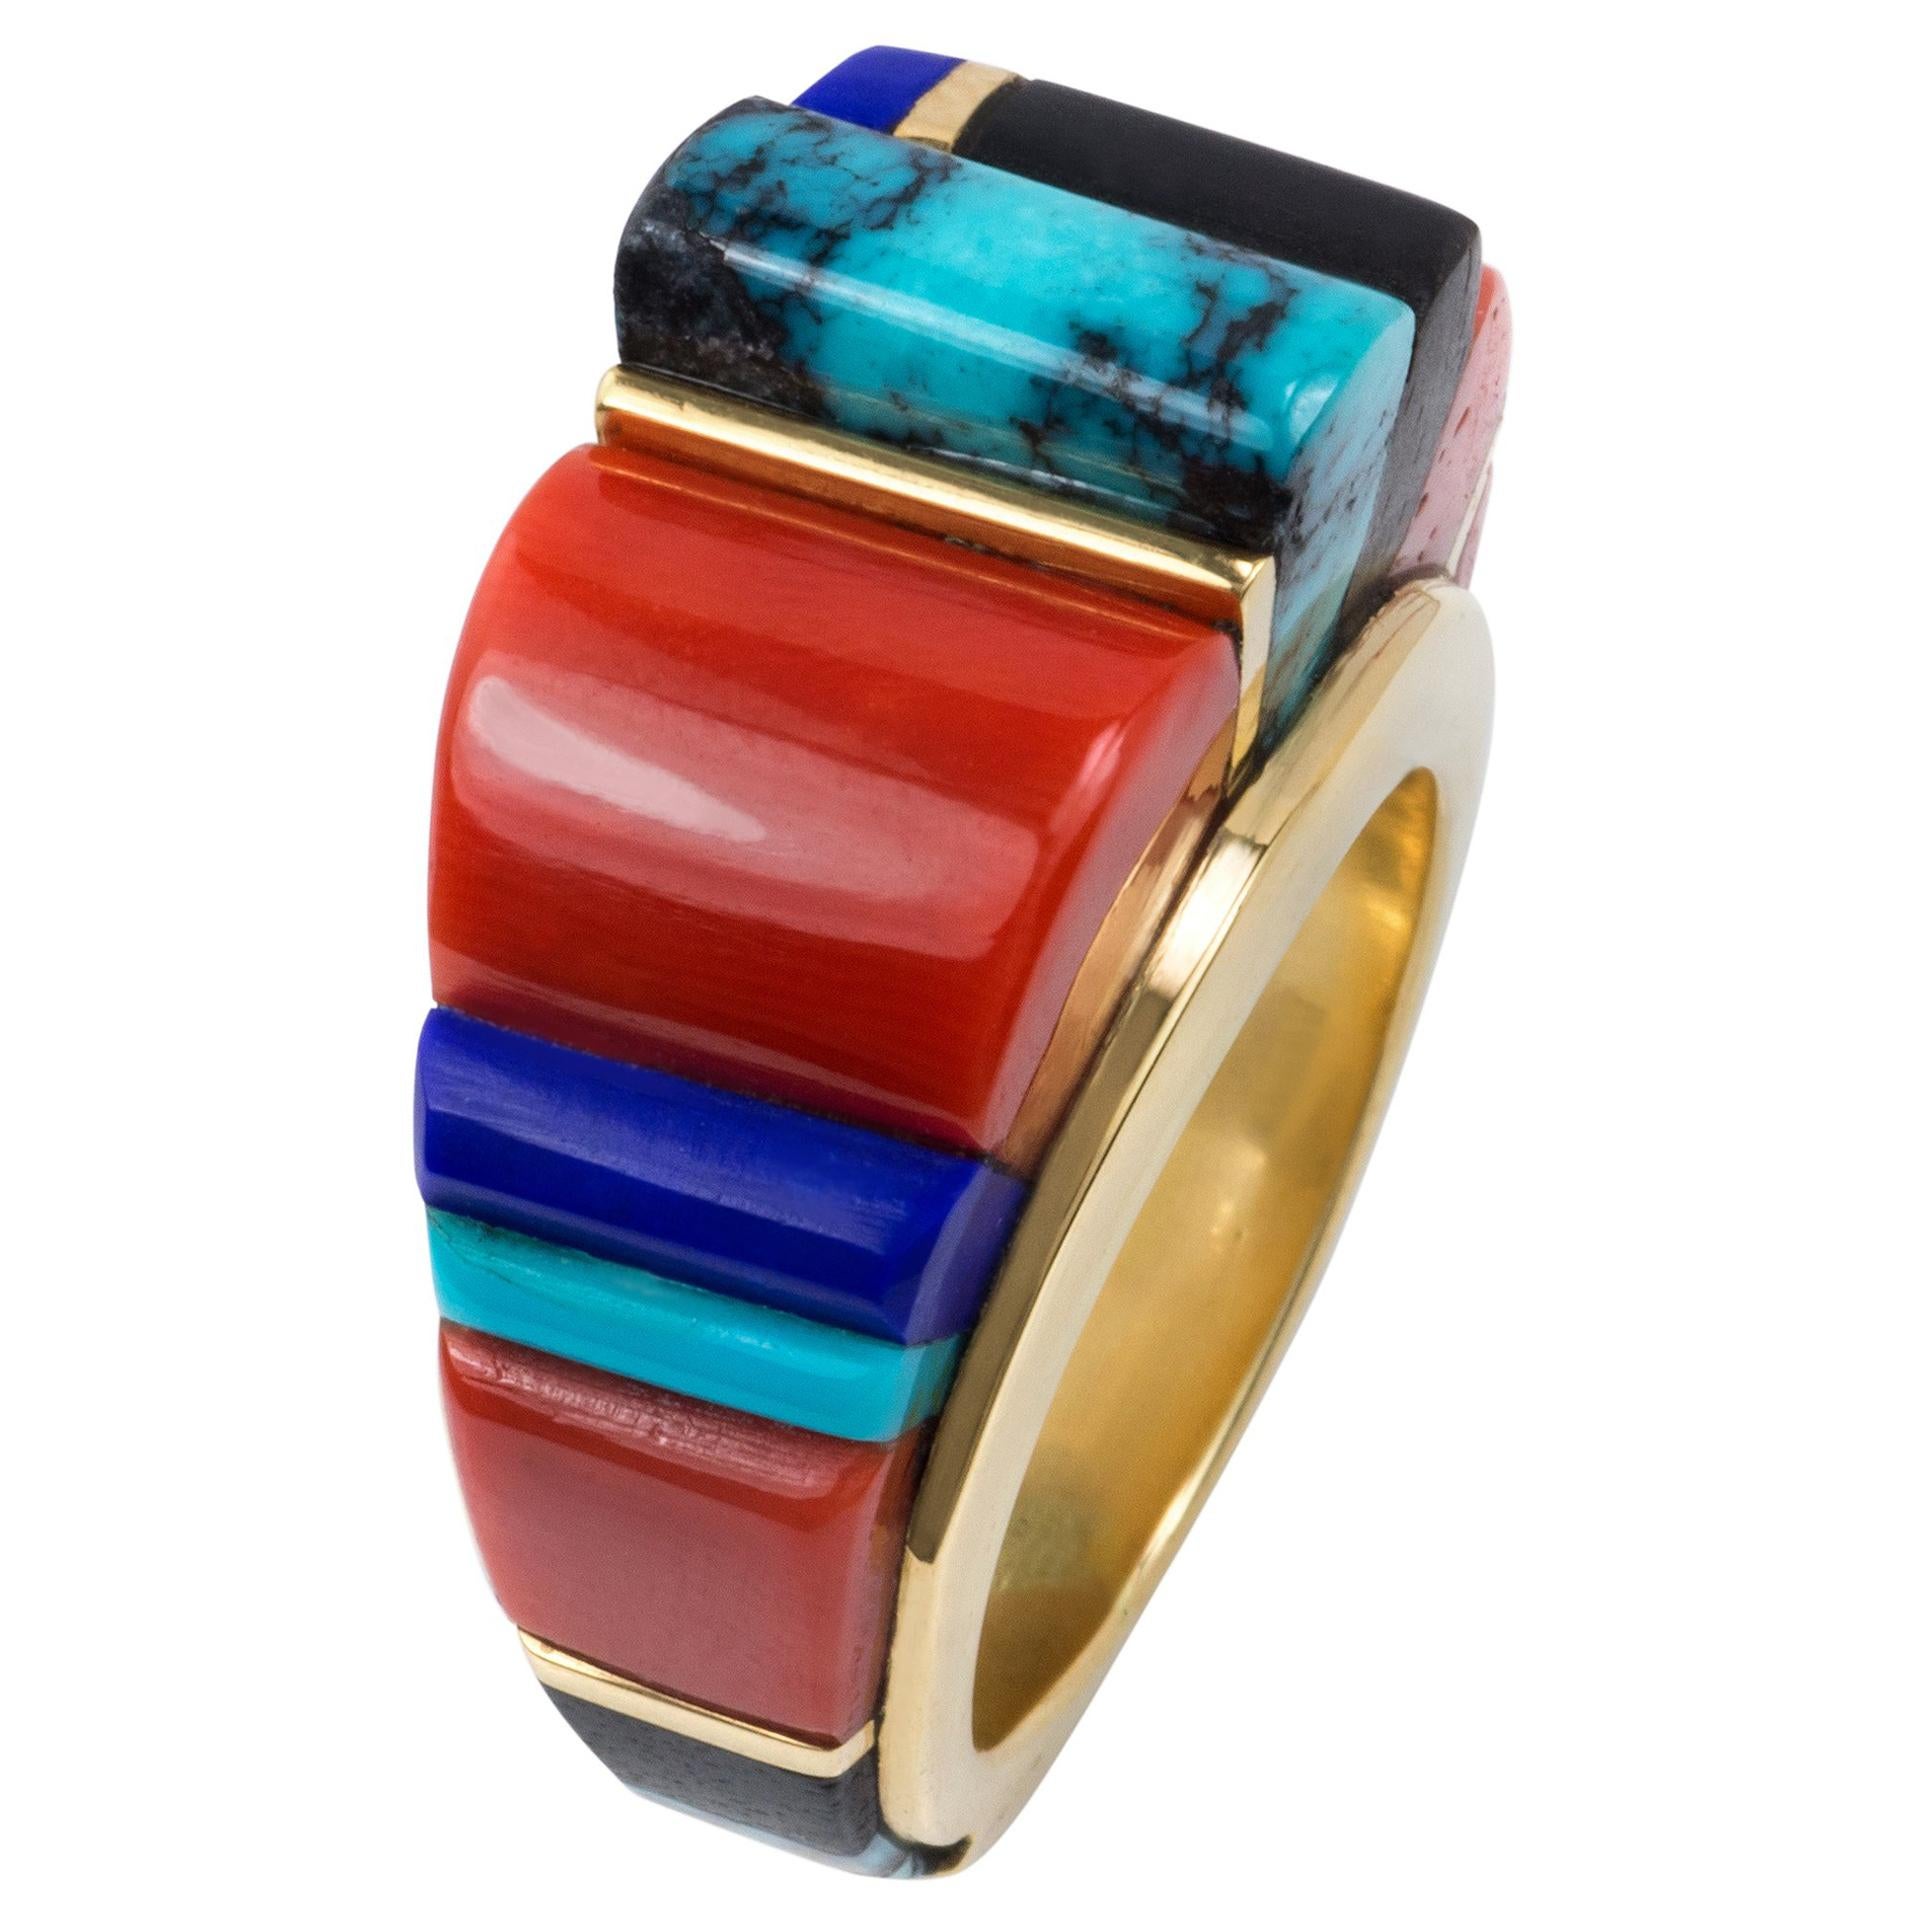 2018 Verma Nequetewa ‘Sonwai’ Coral, Turquoise, Lapis, Wood and Gold Ring